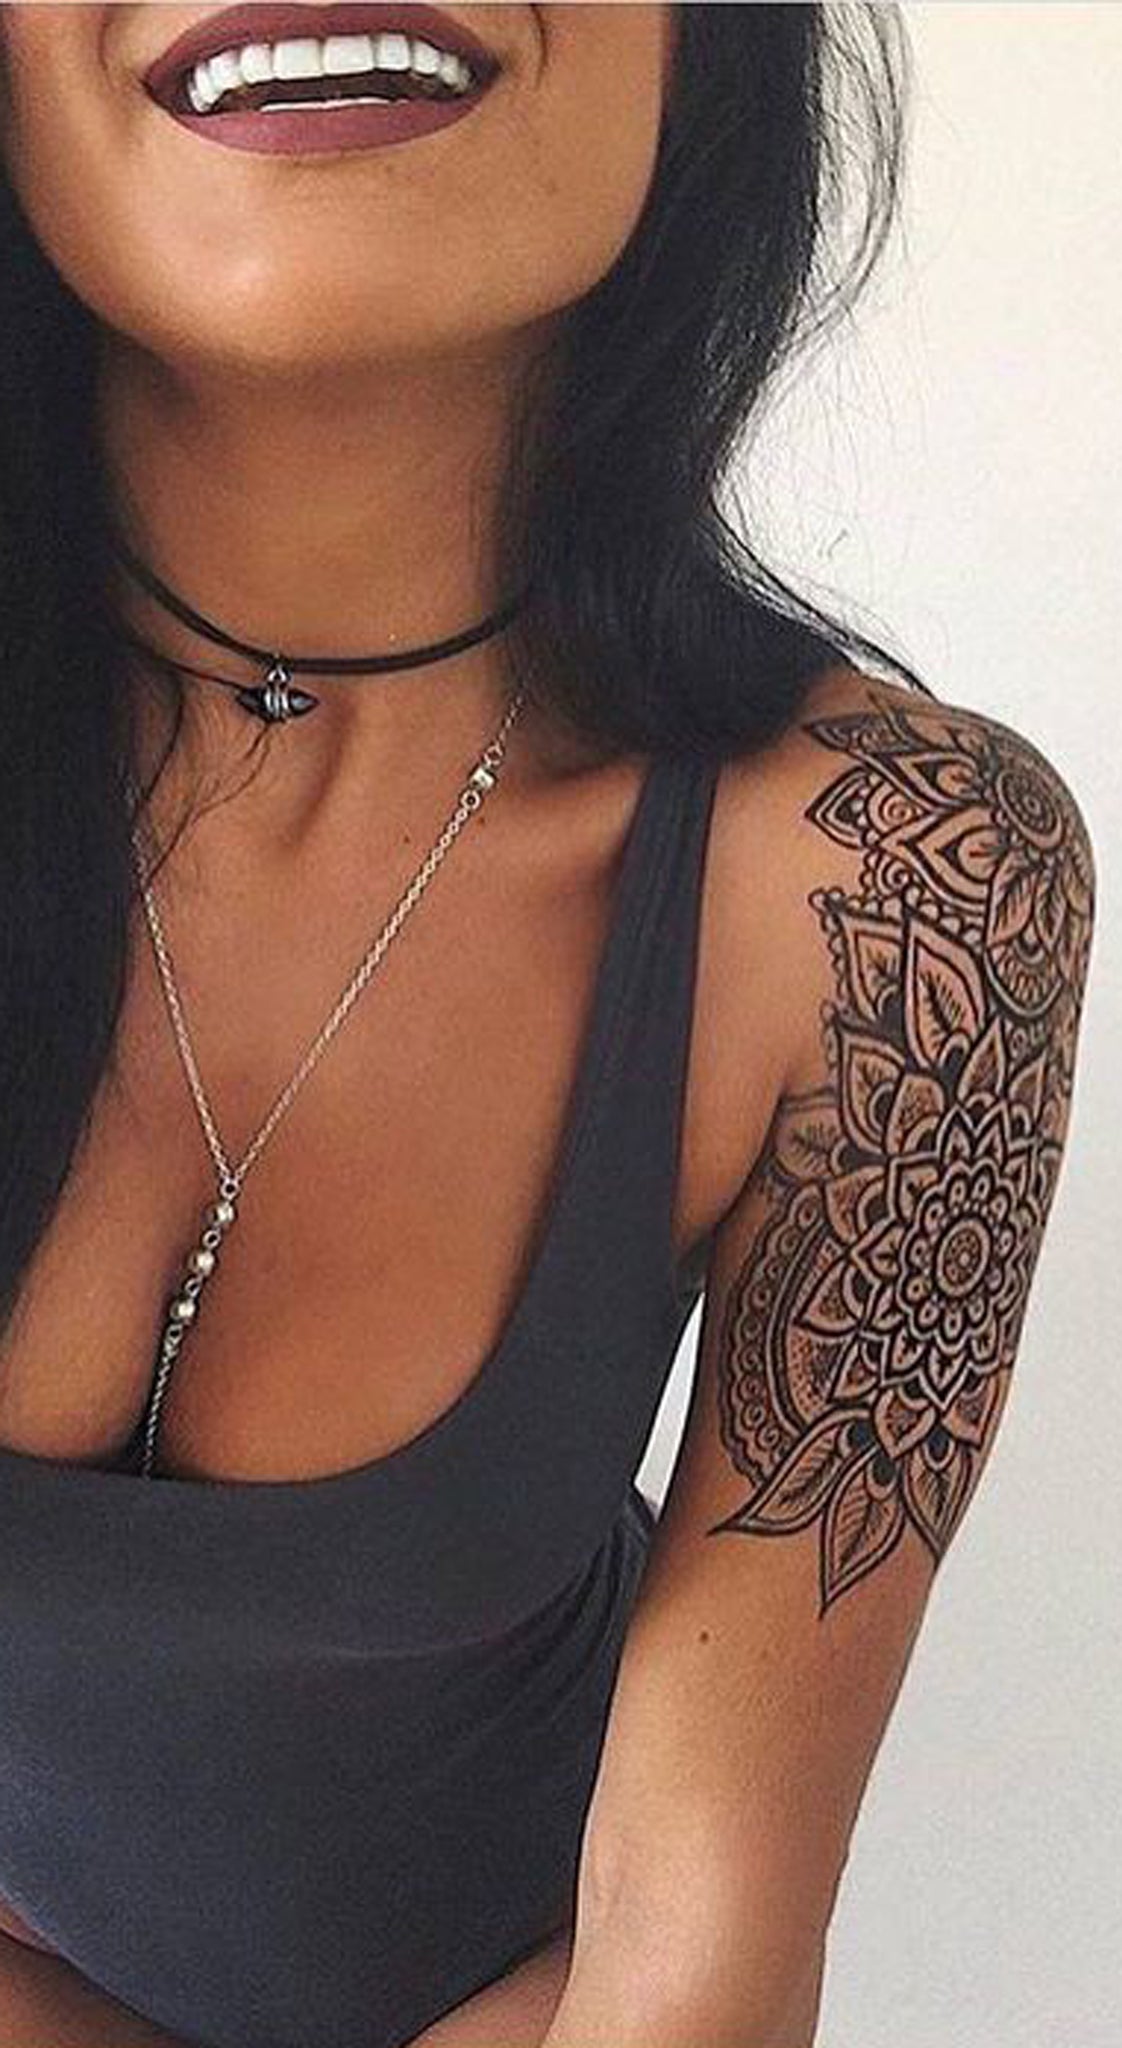 38 Delicious Shoulder Tattoos For Women